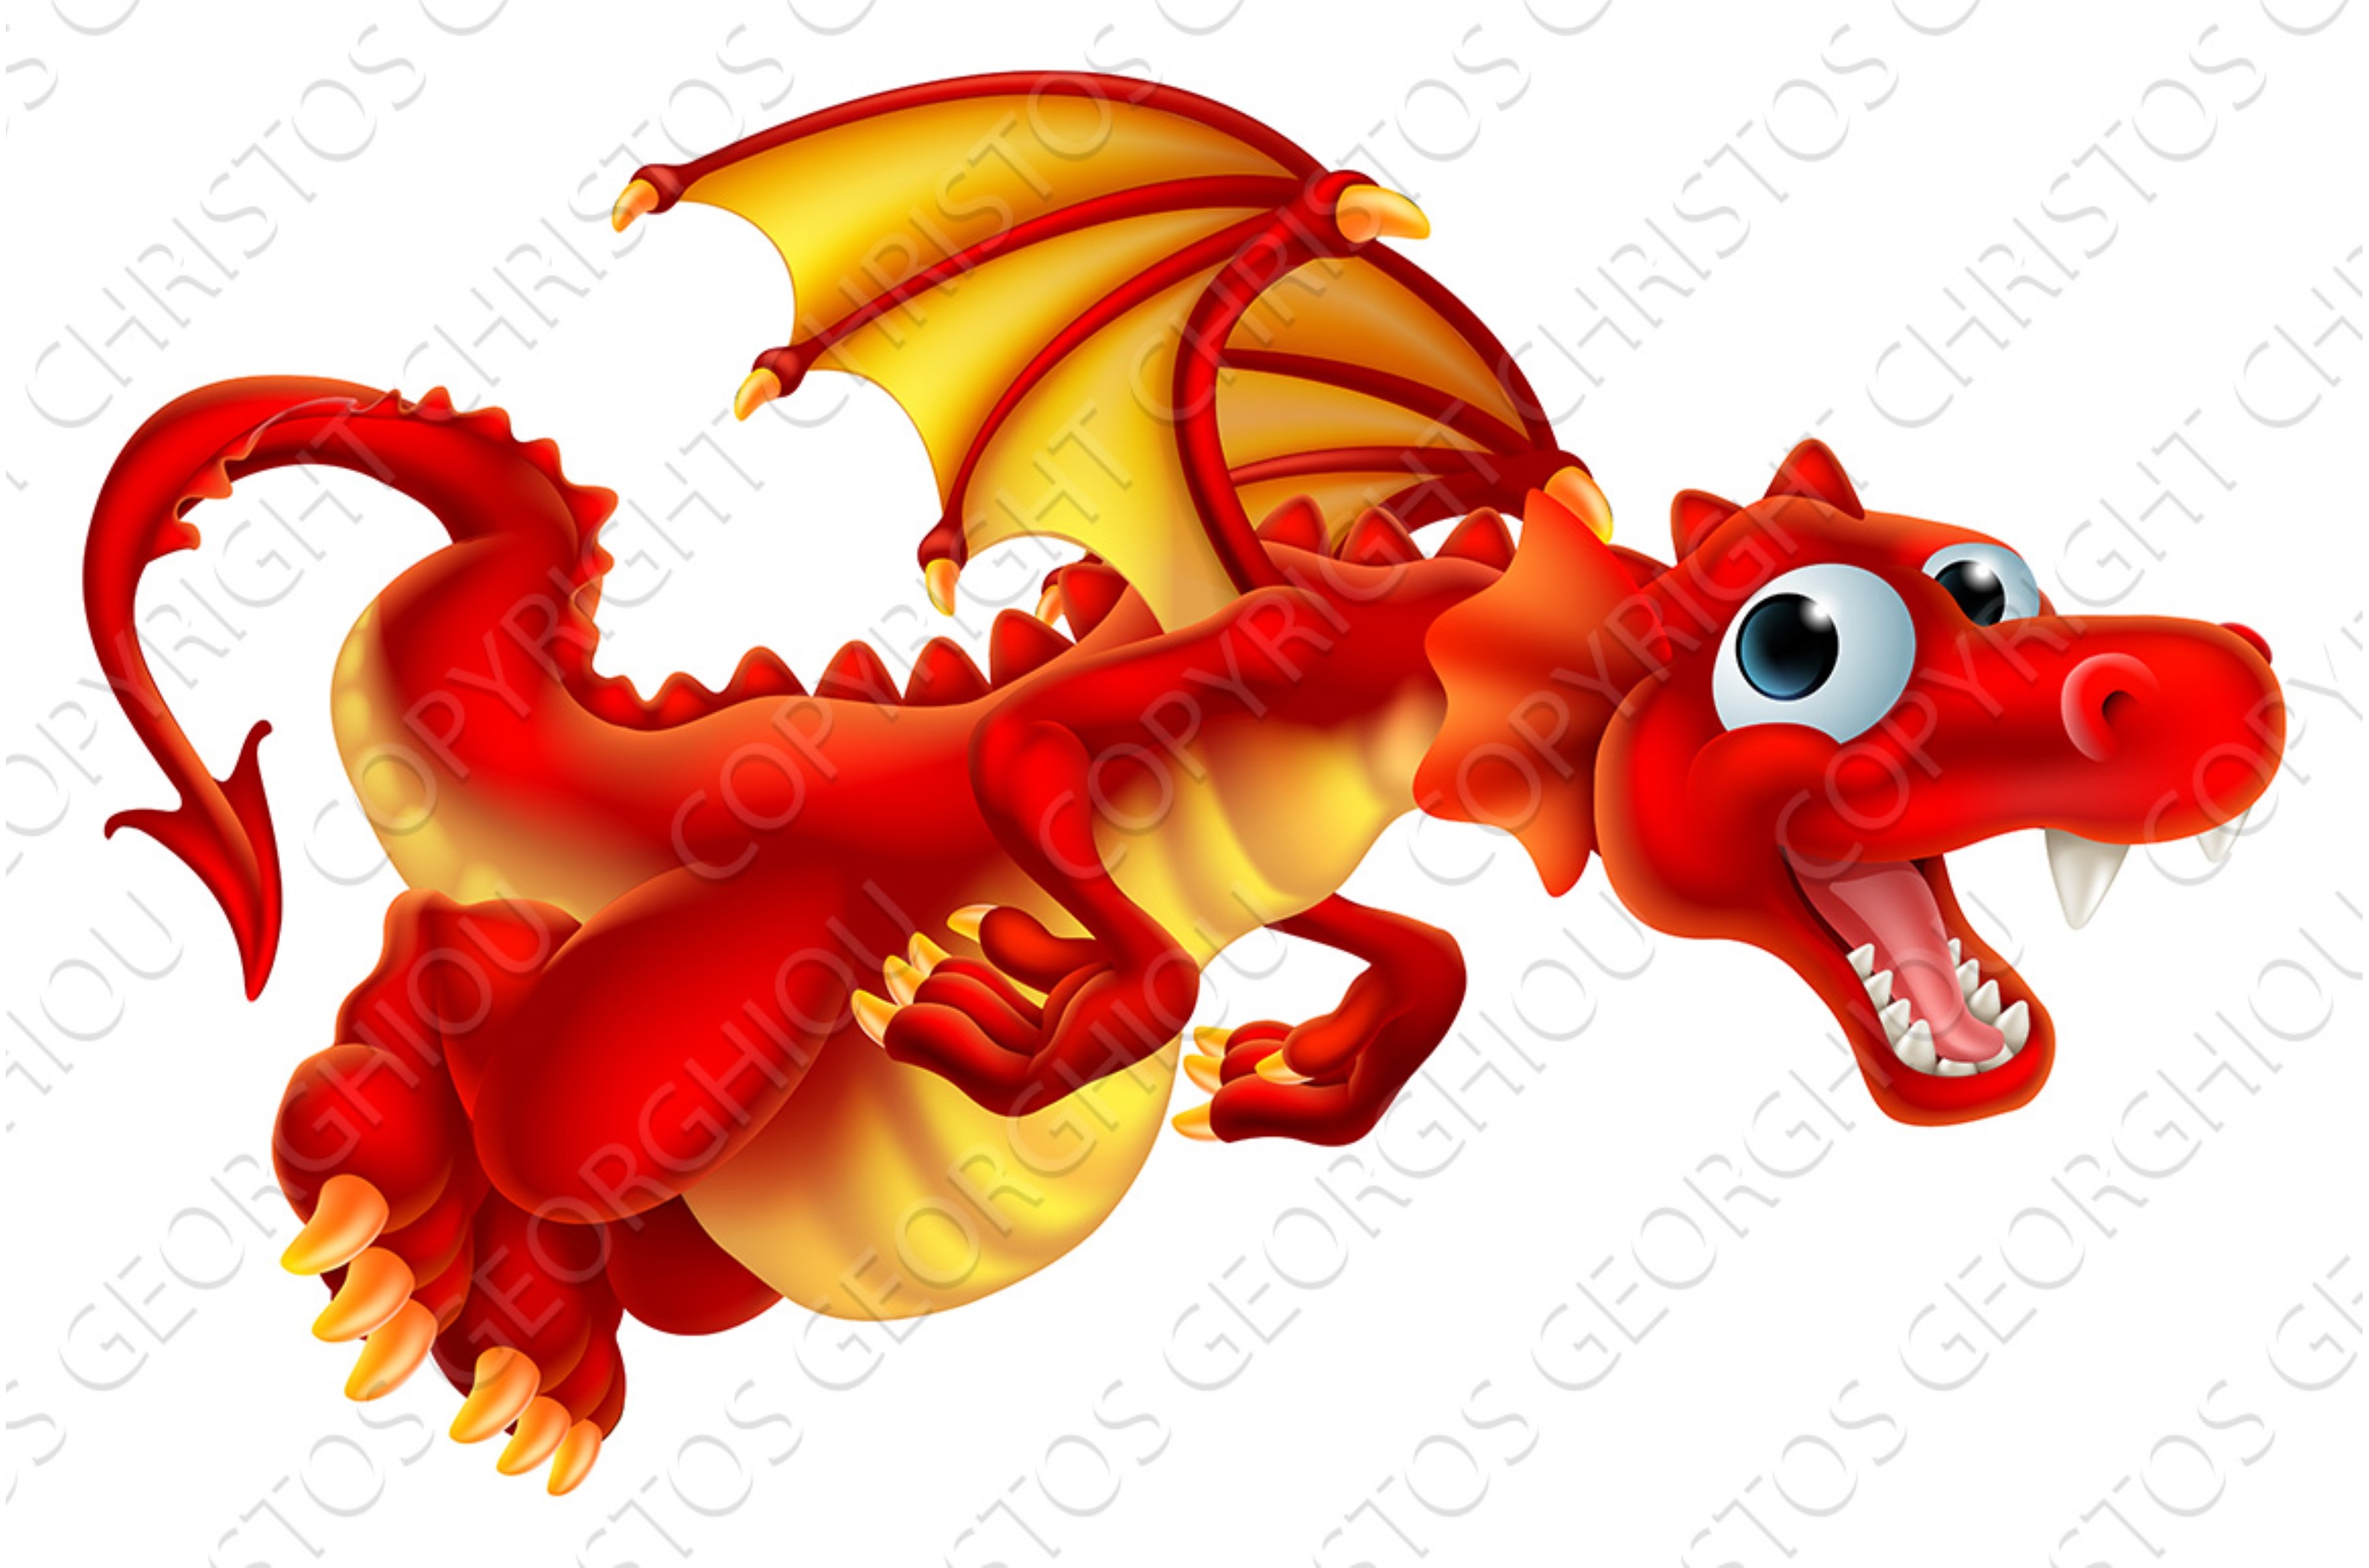 Red Dragon Cartoon Flying Fantasy cover image.